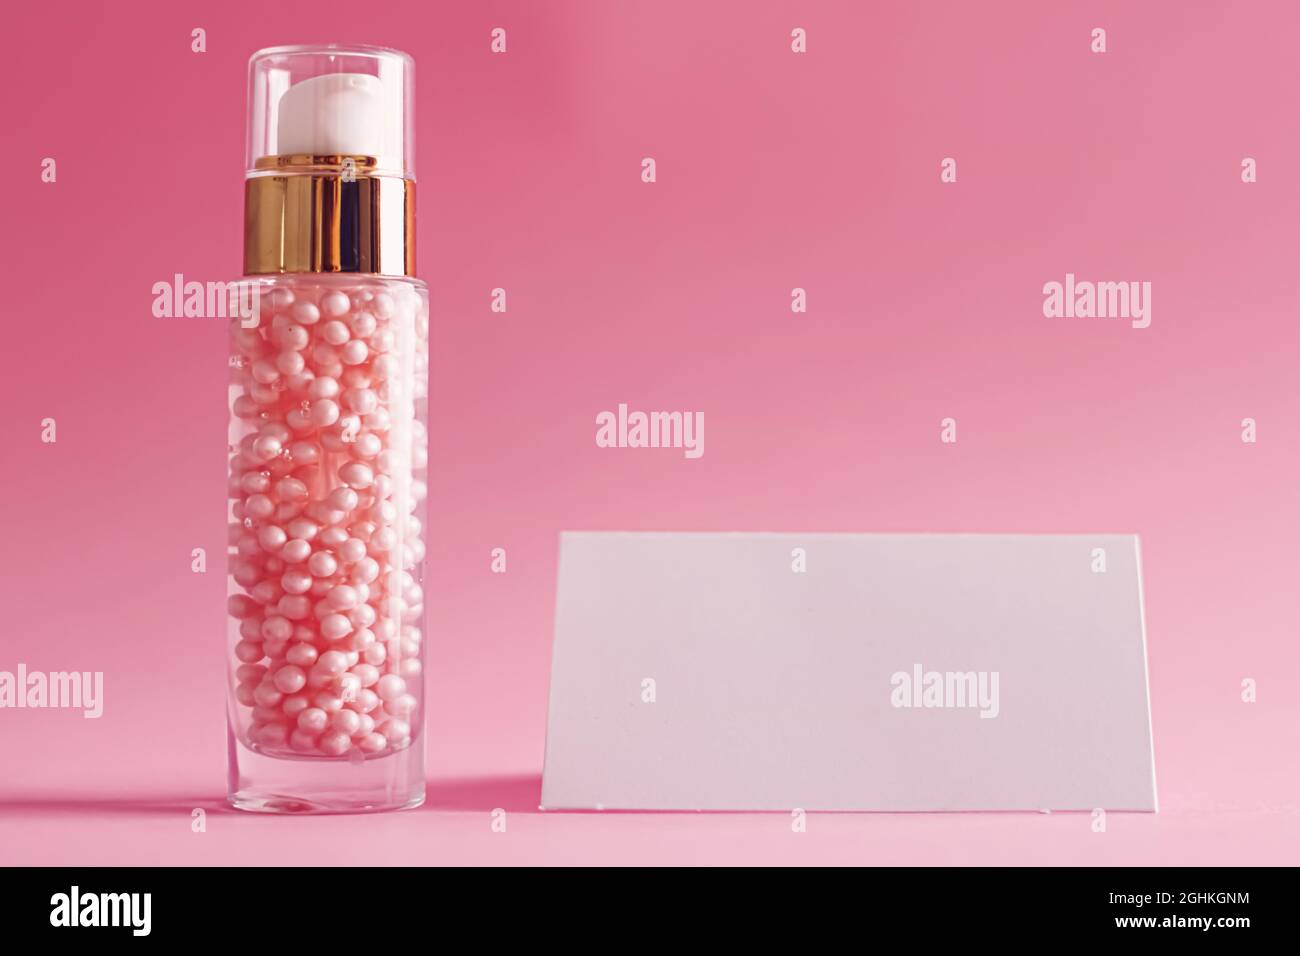 Page 3 - Cosmetics Ad High Resolution Stock Photography and Images - Alamy